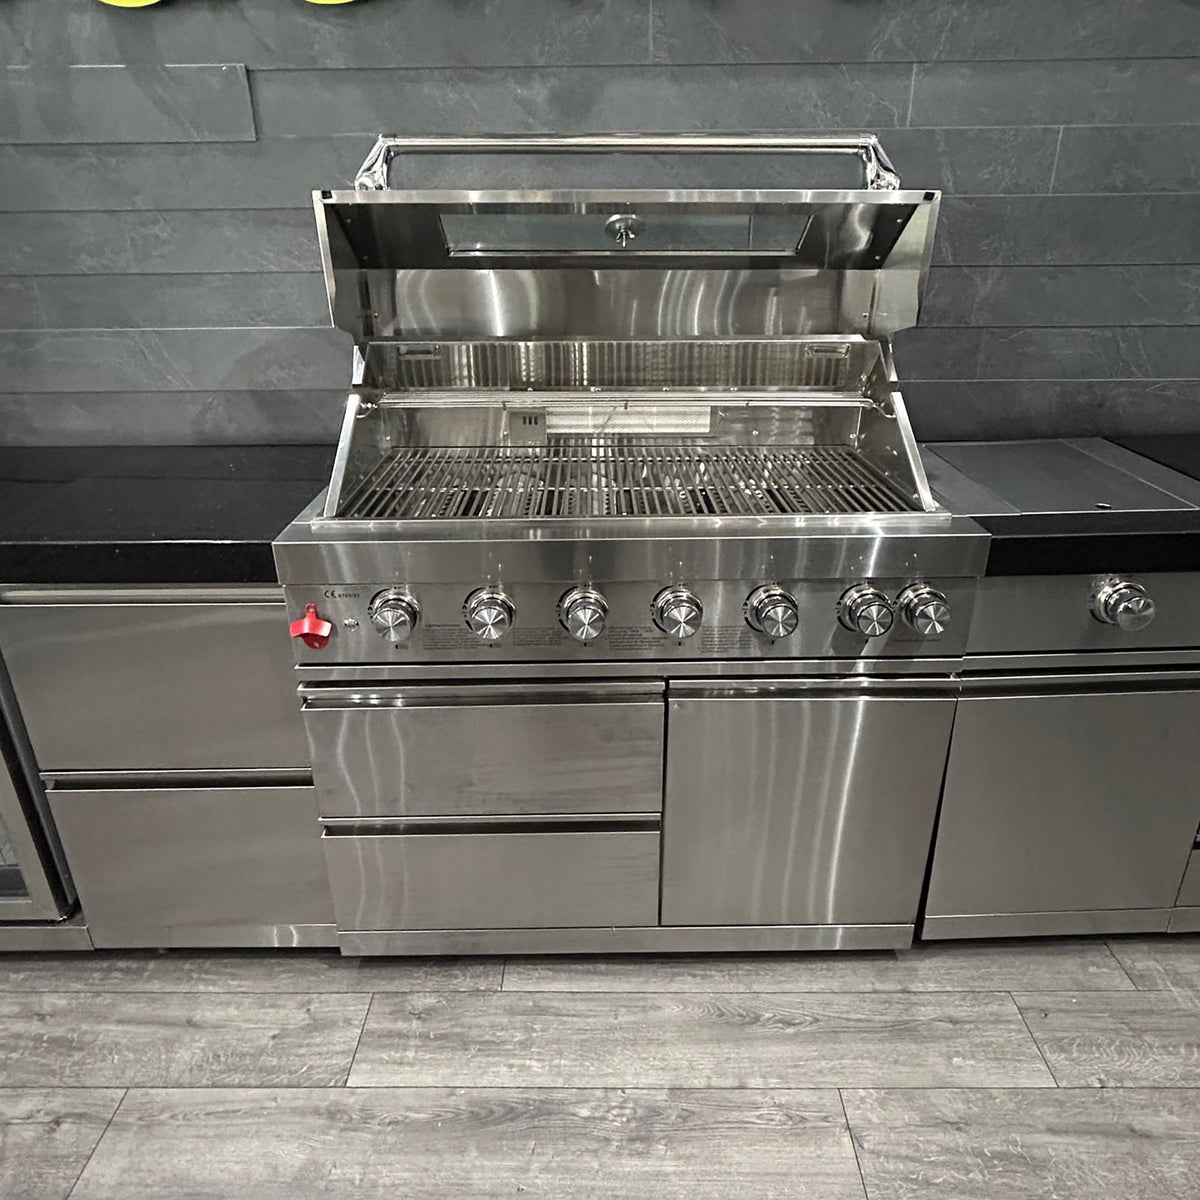 Ex Display Draco Grills 6 Burner Stainless Steel Outdoor Kitchen with Sear Station, Sink and Fridge Unit, Twin Drawer Unit and 4 drawer Unit